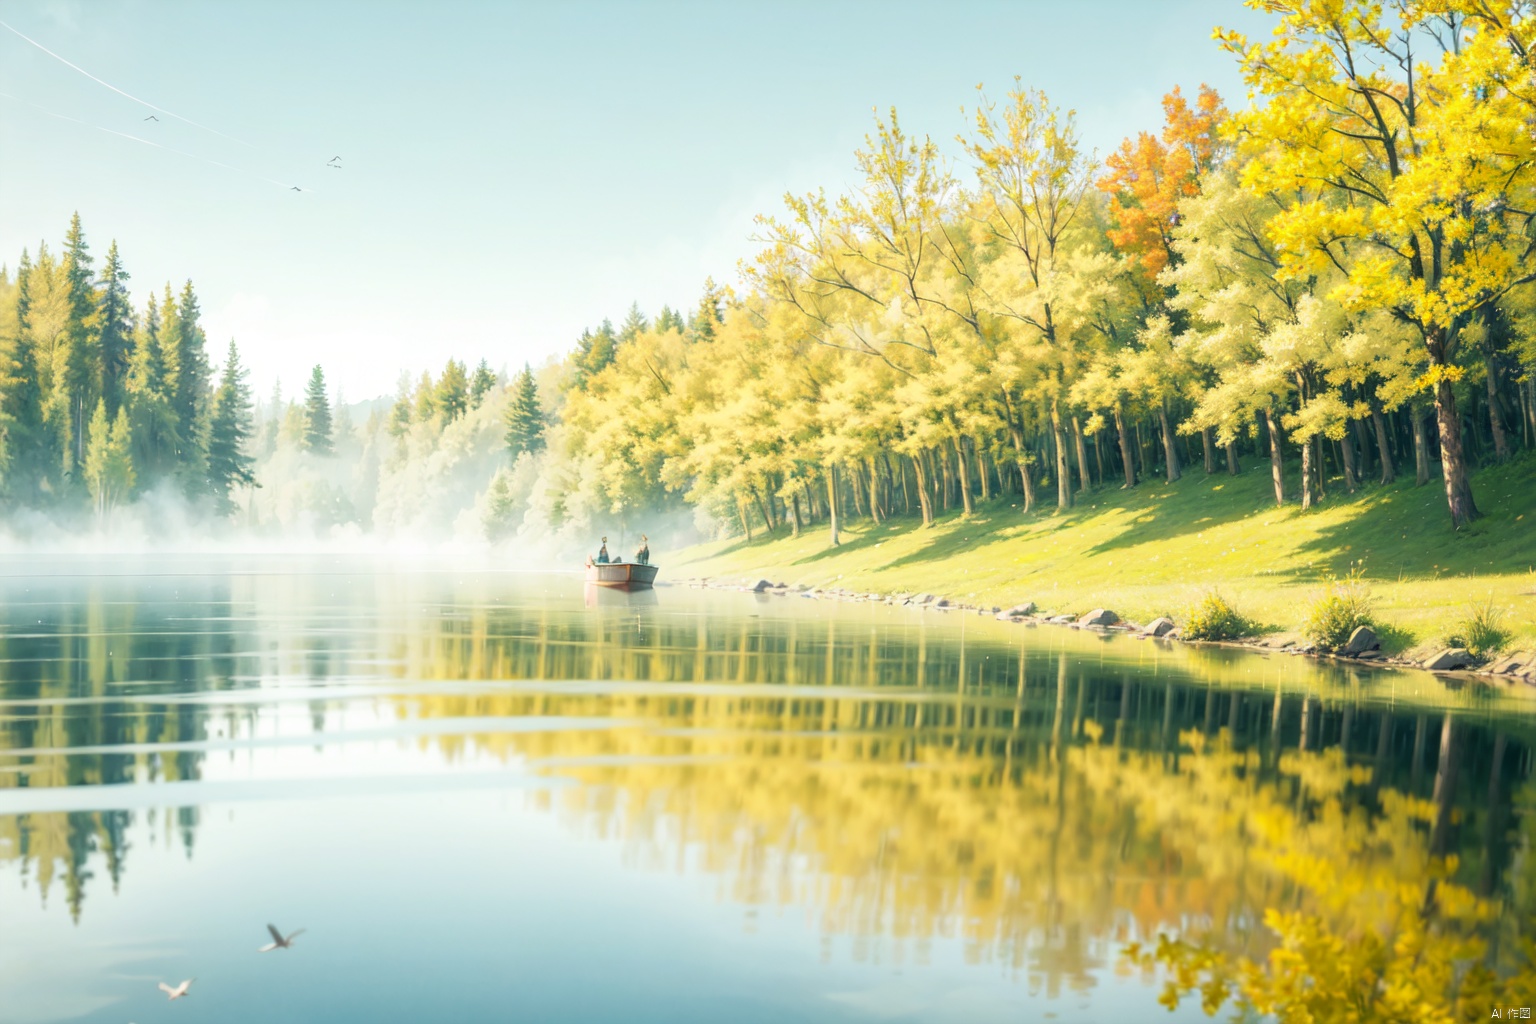 capture a serene early spring scene on a misty lake a wooden boat. trees with fresh green buds line the shore. above, a pair of swallows fly among young willow branches. the atmosphere is calm and expectant, signaling the awakening of nature, gf, ycbh